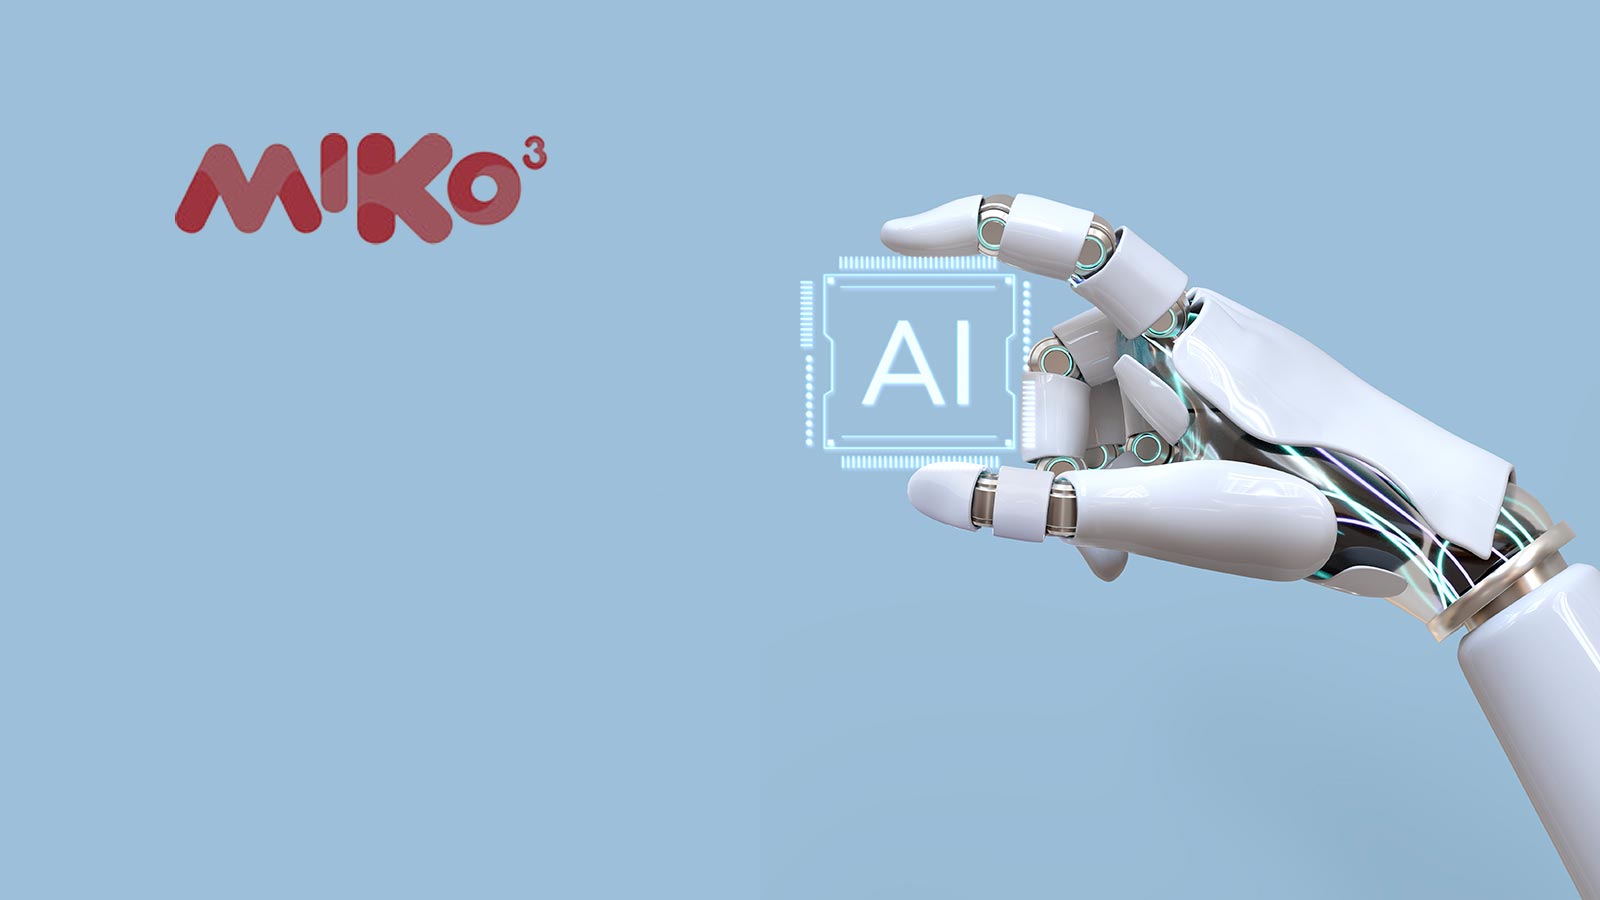 https://aithority.com/wp-content/uploads/2021/10/Miko-3-Brings-Genuine-Friendship-Advanced-Artificial-Intelligence-To-Young-Learners-Worldwide.jpg